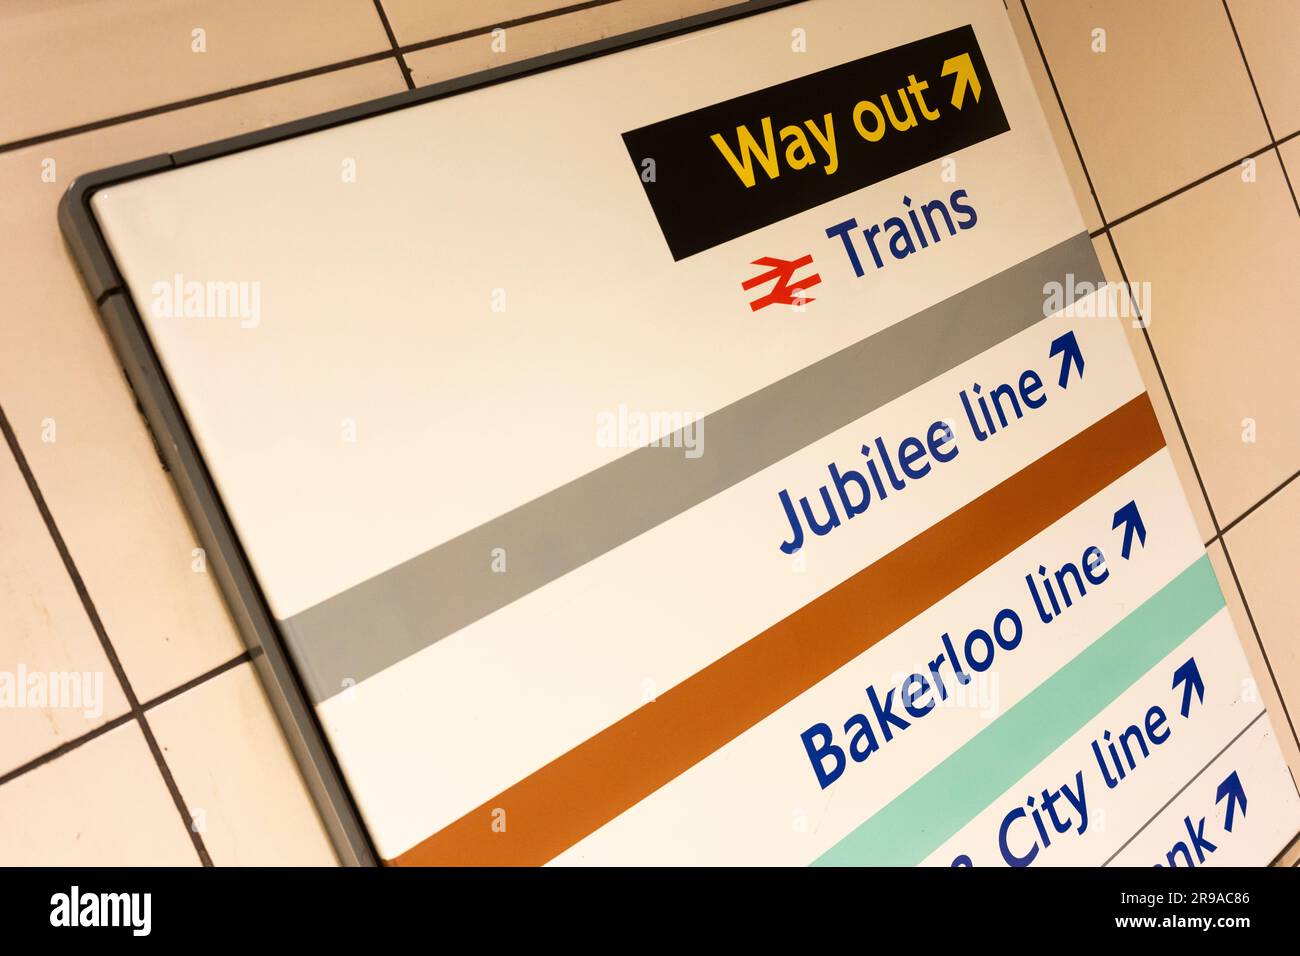 Directions sign on the London Underground showing the Way Out, Jubilee Line, Bakerloo Line, Waterloo and City Line and South Bank tube lines. UK Stock Photo